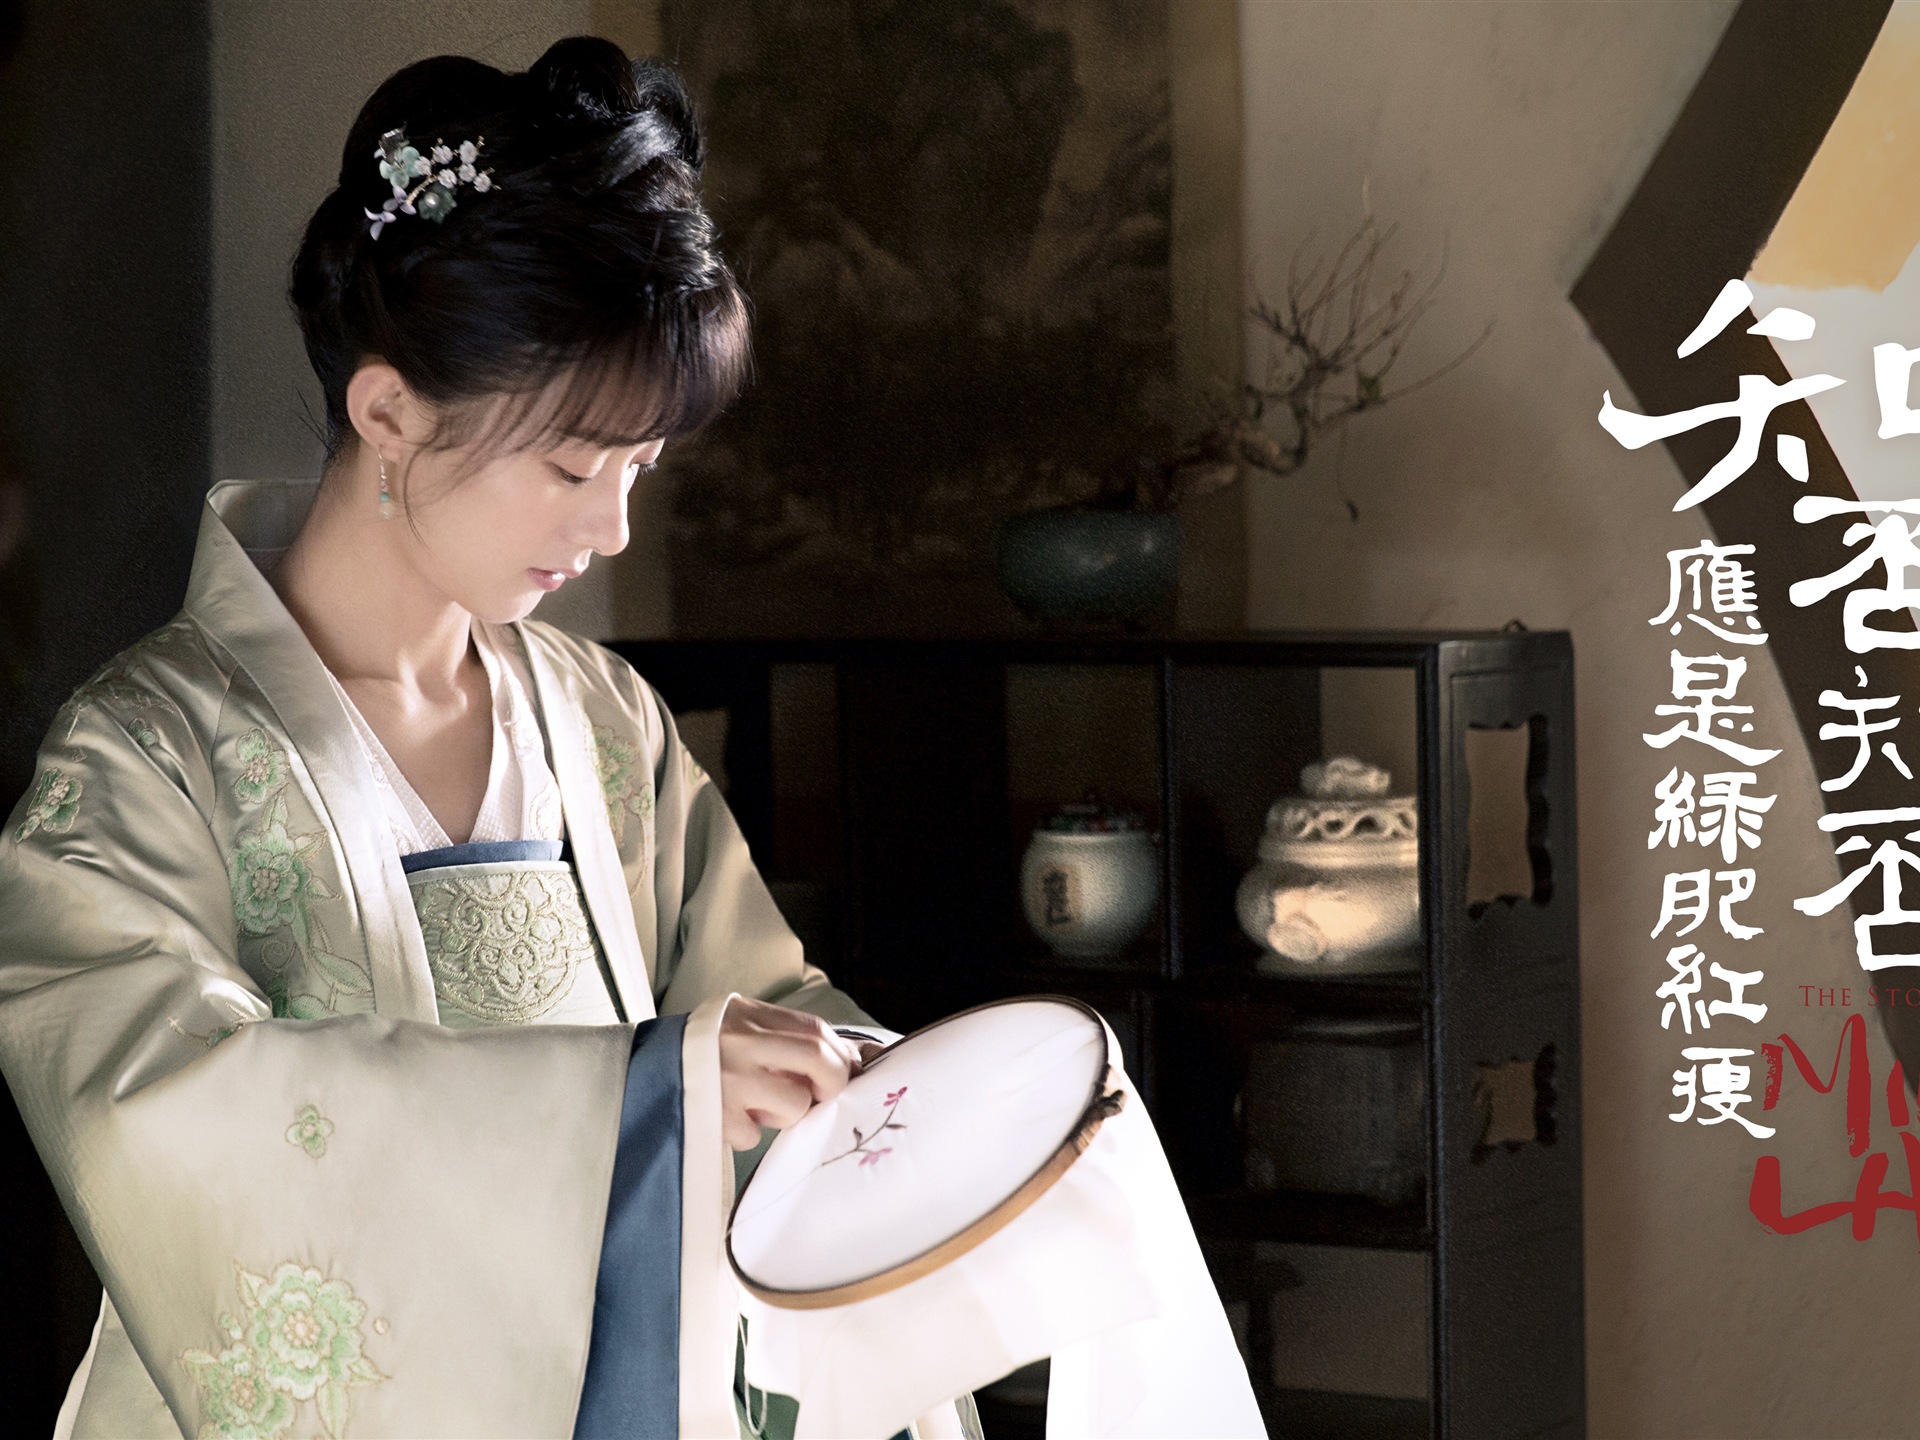 The Story Of MingLan, TV series HD wallpapers #23 - 1920x1440